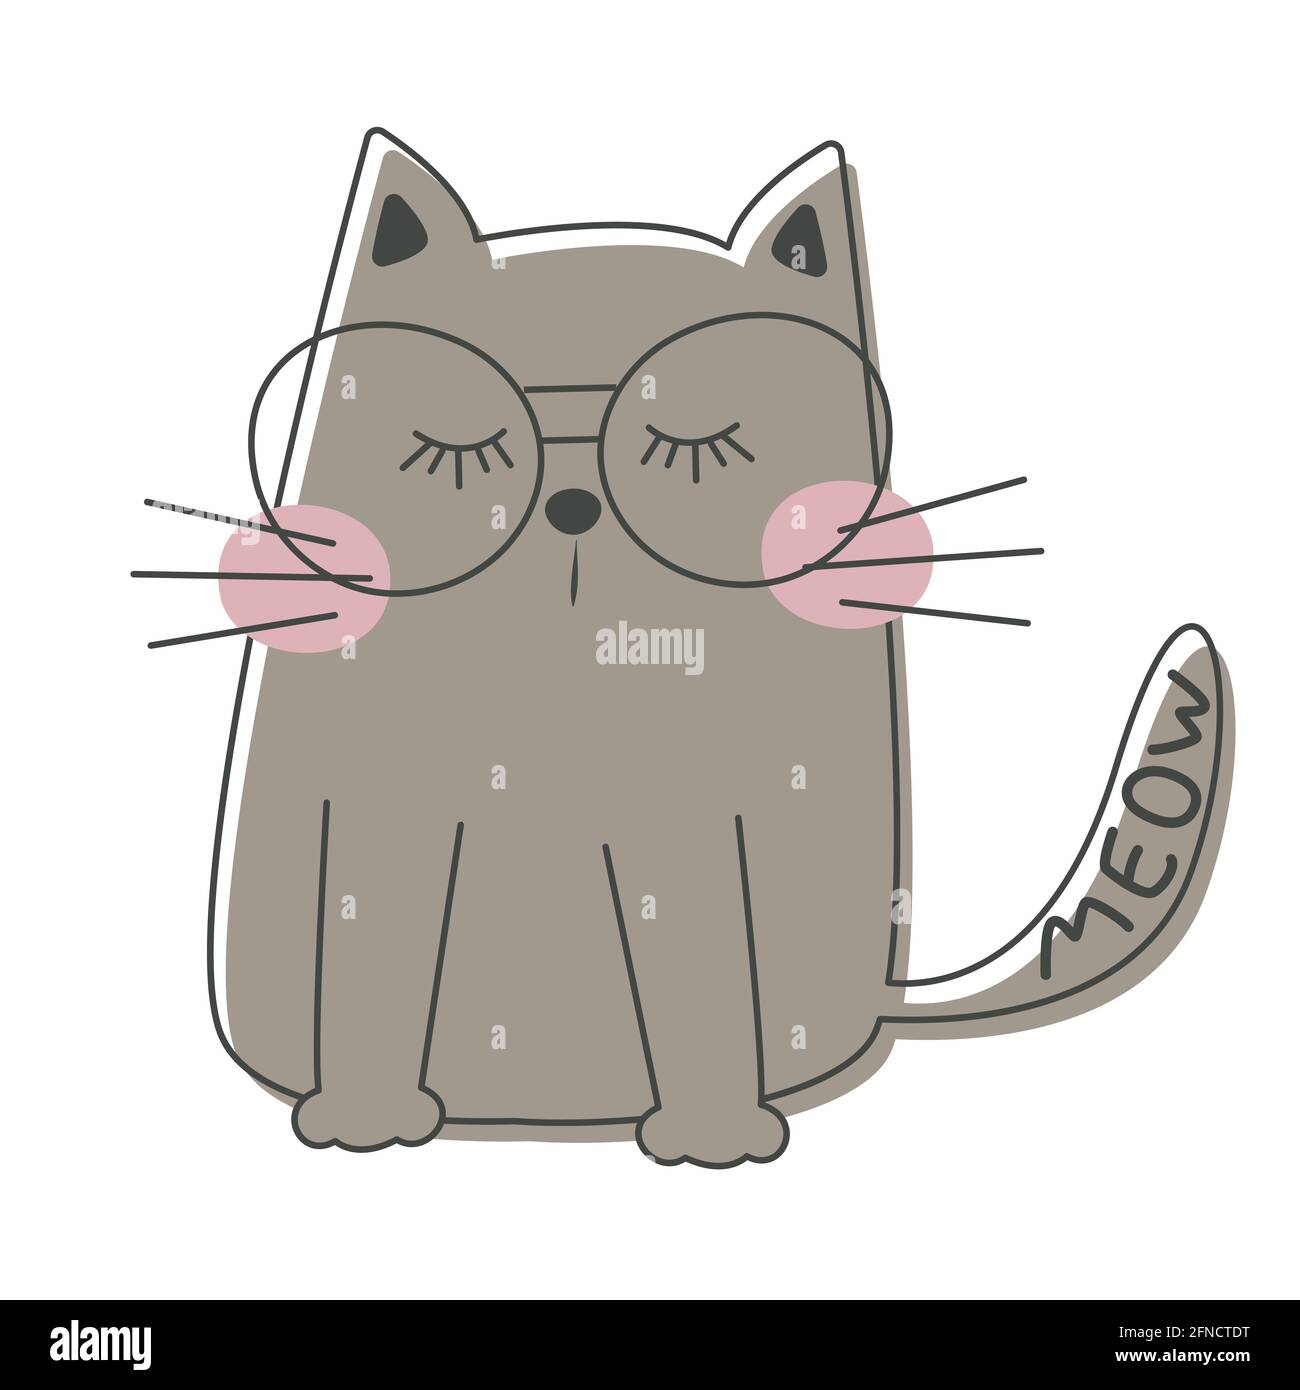 Cute cartoon cat sketch, illustration with text Meow Stock Vector Image &  Art - Alamy